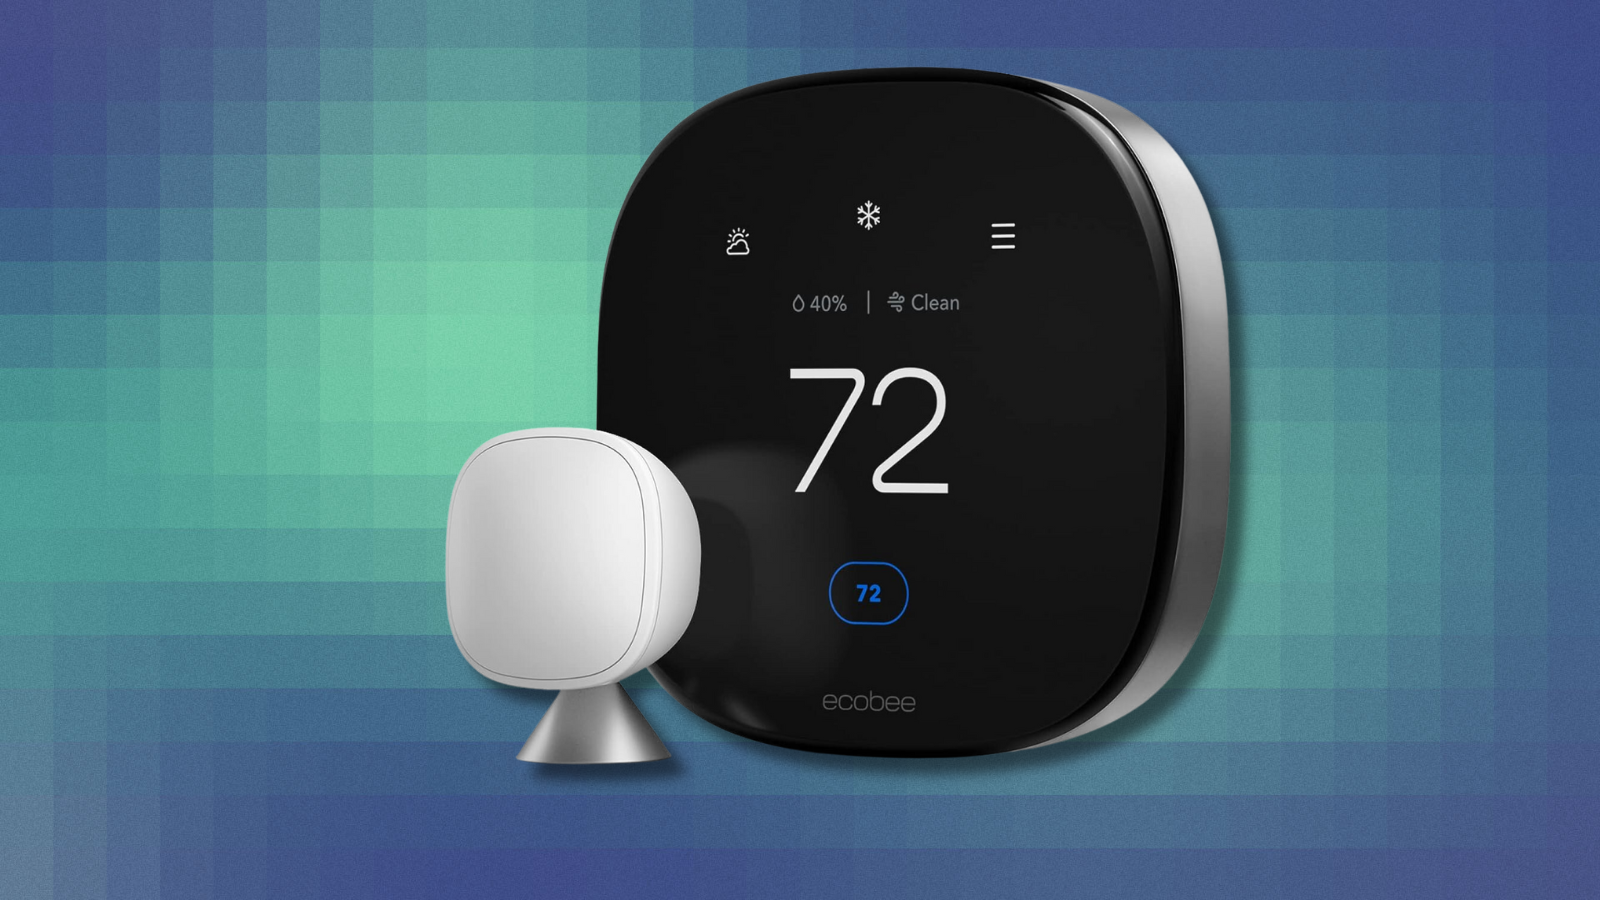 Ecobee Smart Thermostat Premium on blue and green abstract background